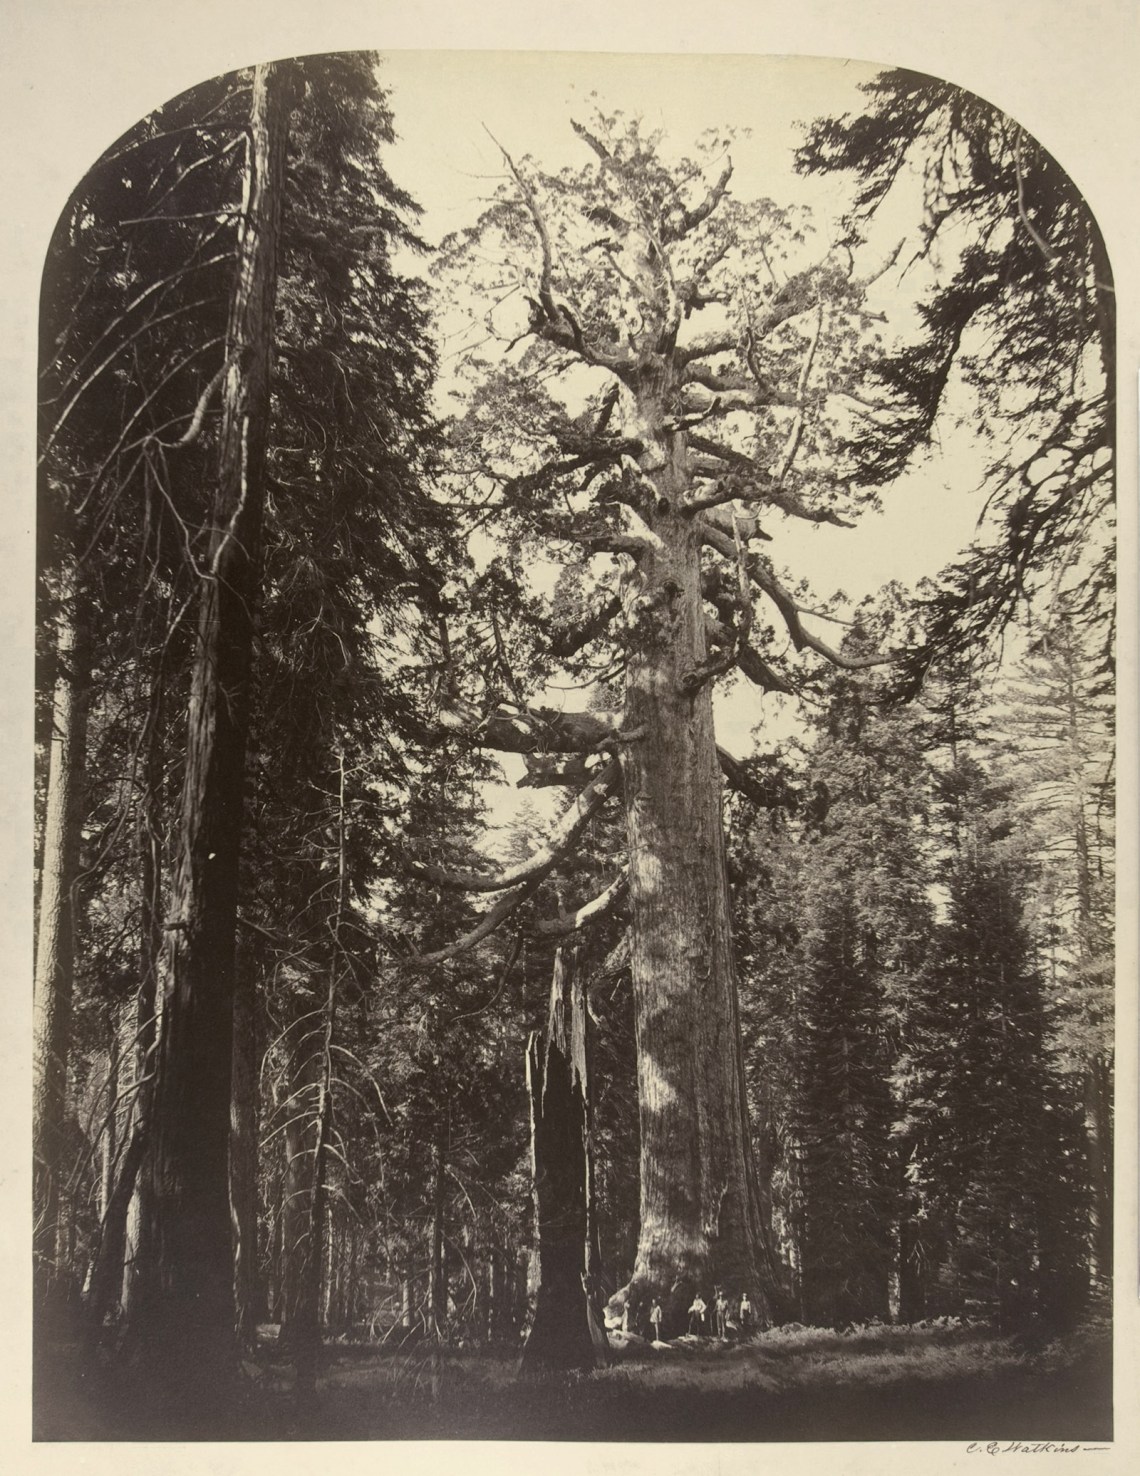 The ‘Grizzly Giant’ sequoia tree in Mariposa Grove, Yosemite, California